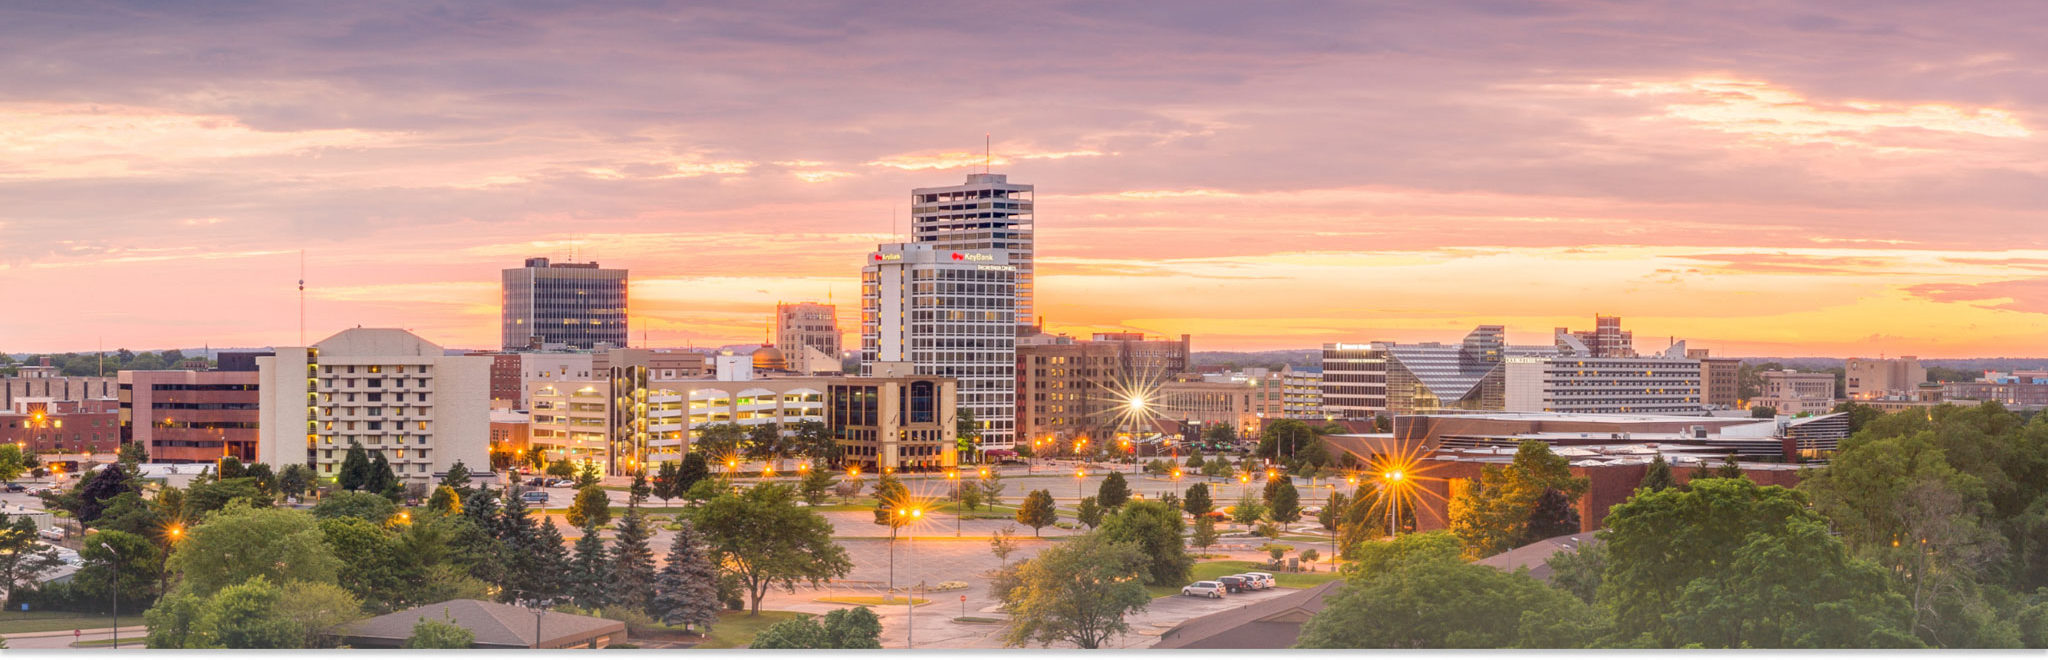 Panorama landscape photo of downtown South Bend at sunset